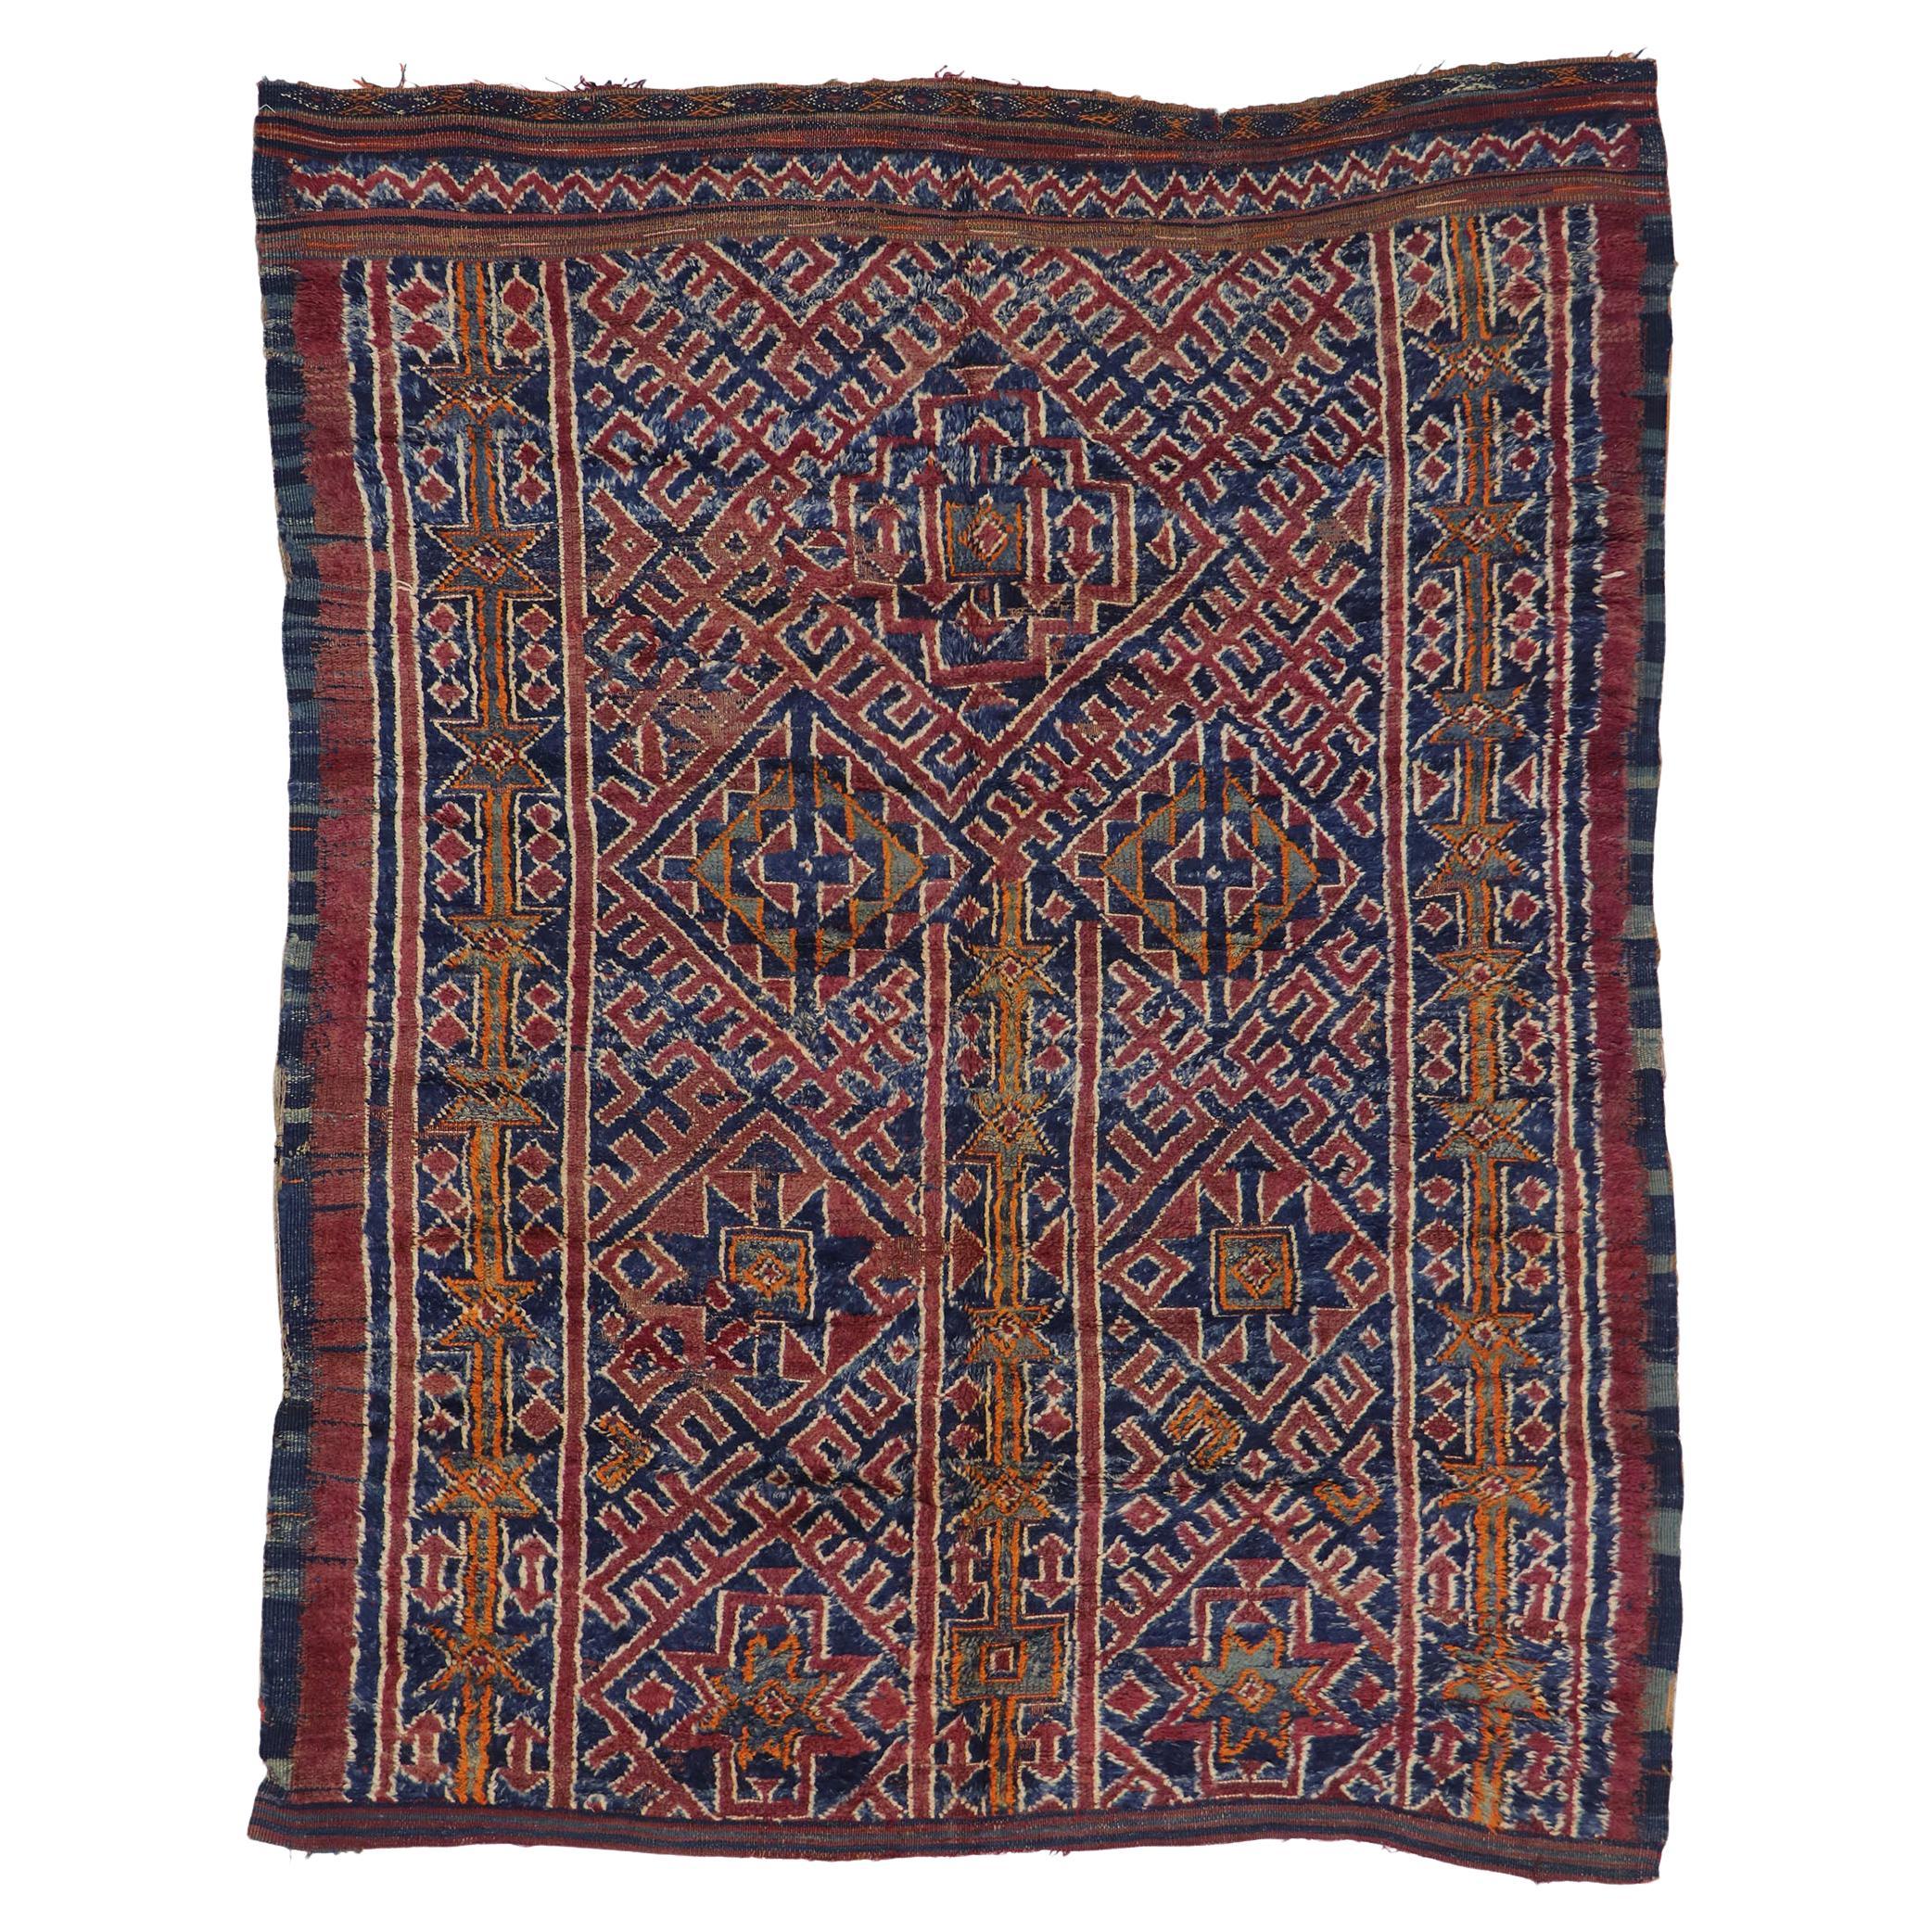 Vintage Beni M'Guild Moroccan Rug with Tribal Style